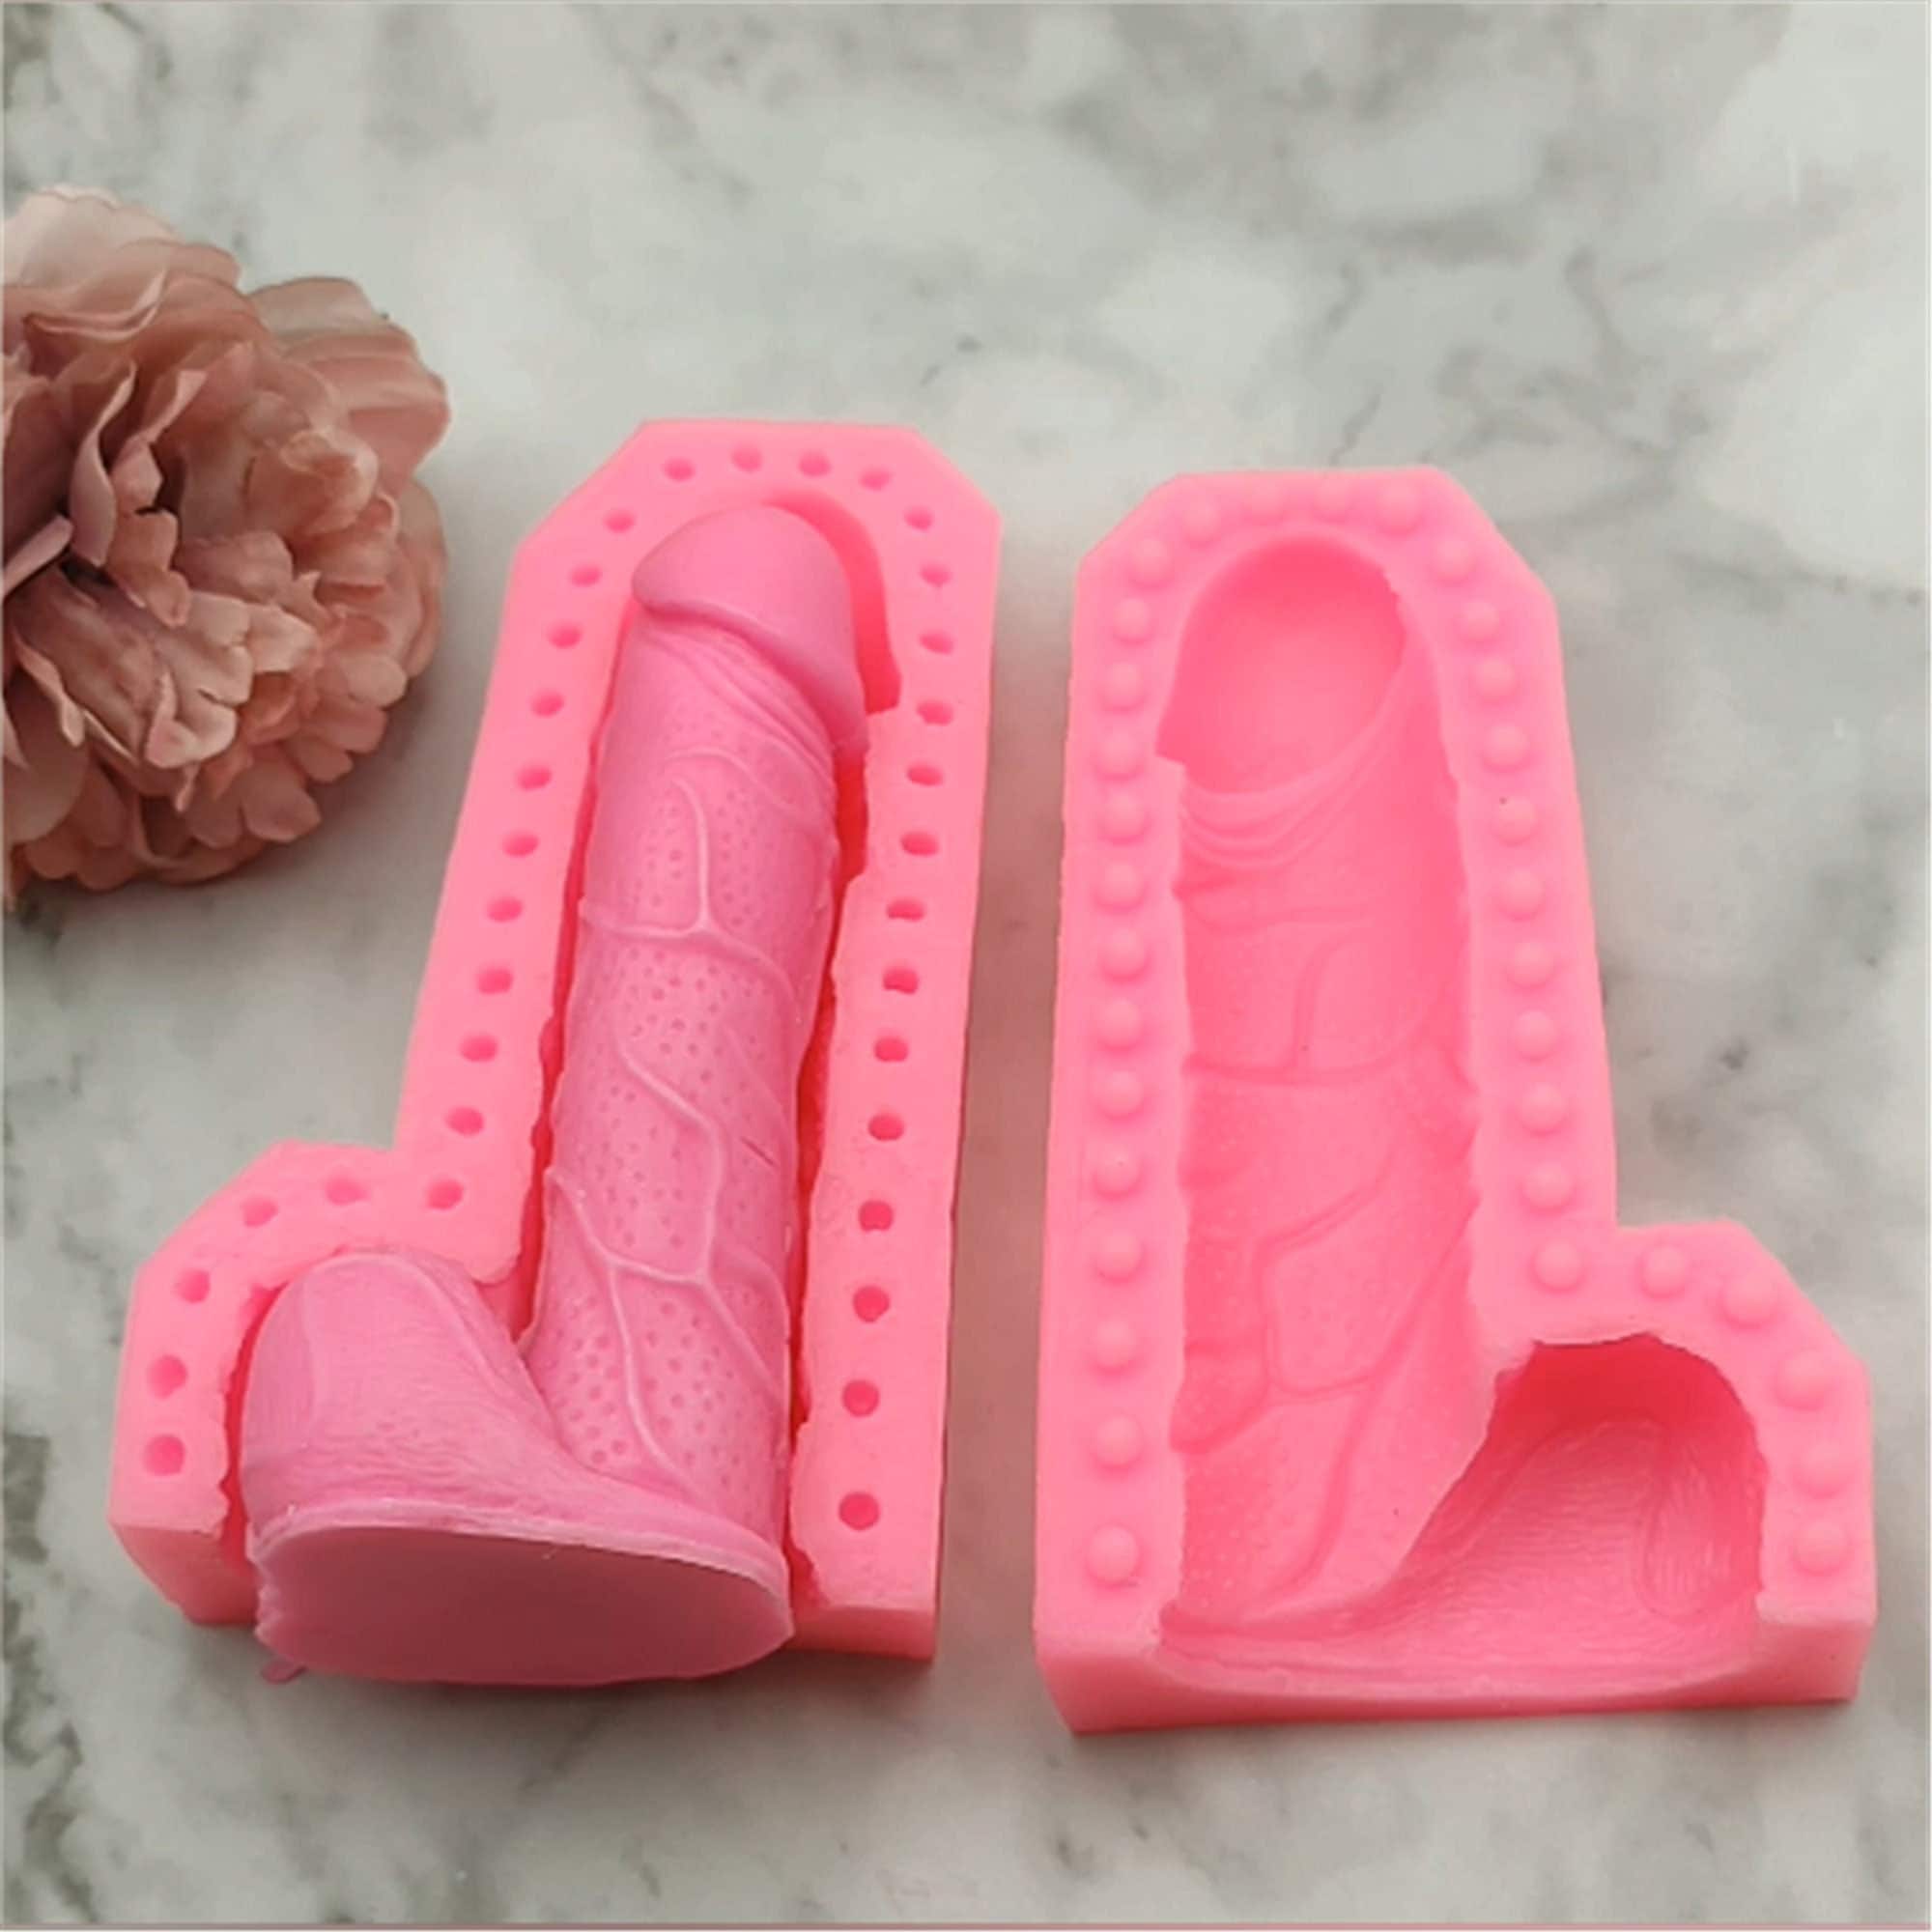 2 PENIS Ice Cube Trays Penis Bachelorette Penis Chocolate Penis Mold DIY  Penis Silly Willy Party Chilly Willy Funny Ice Cubes -  Israel